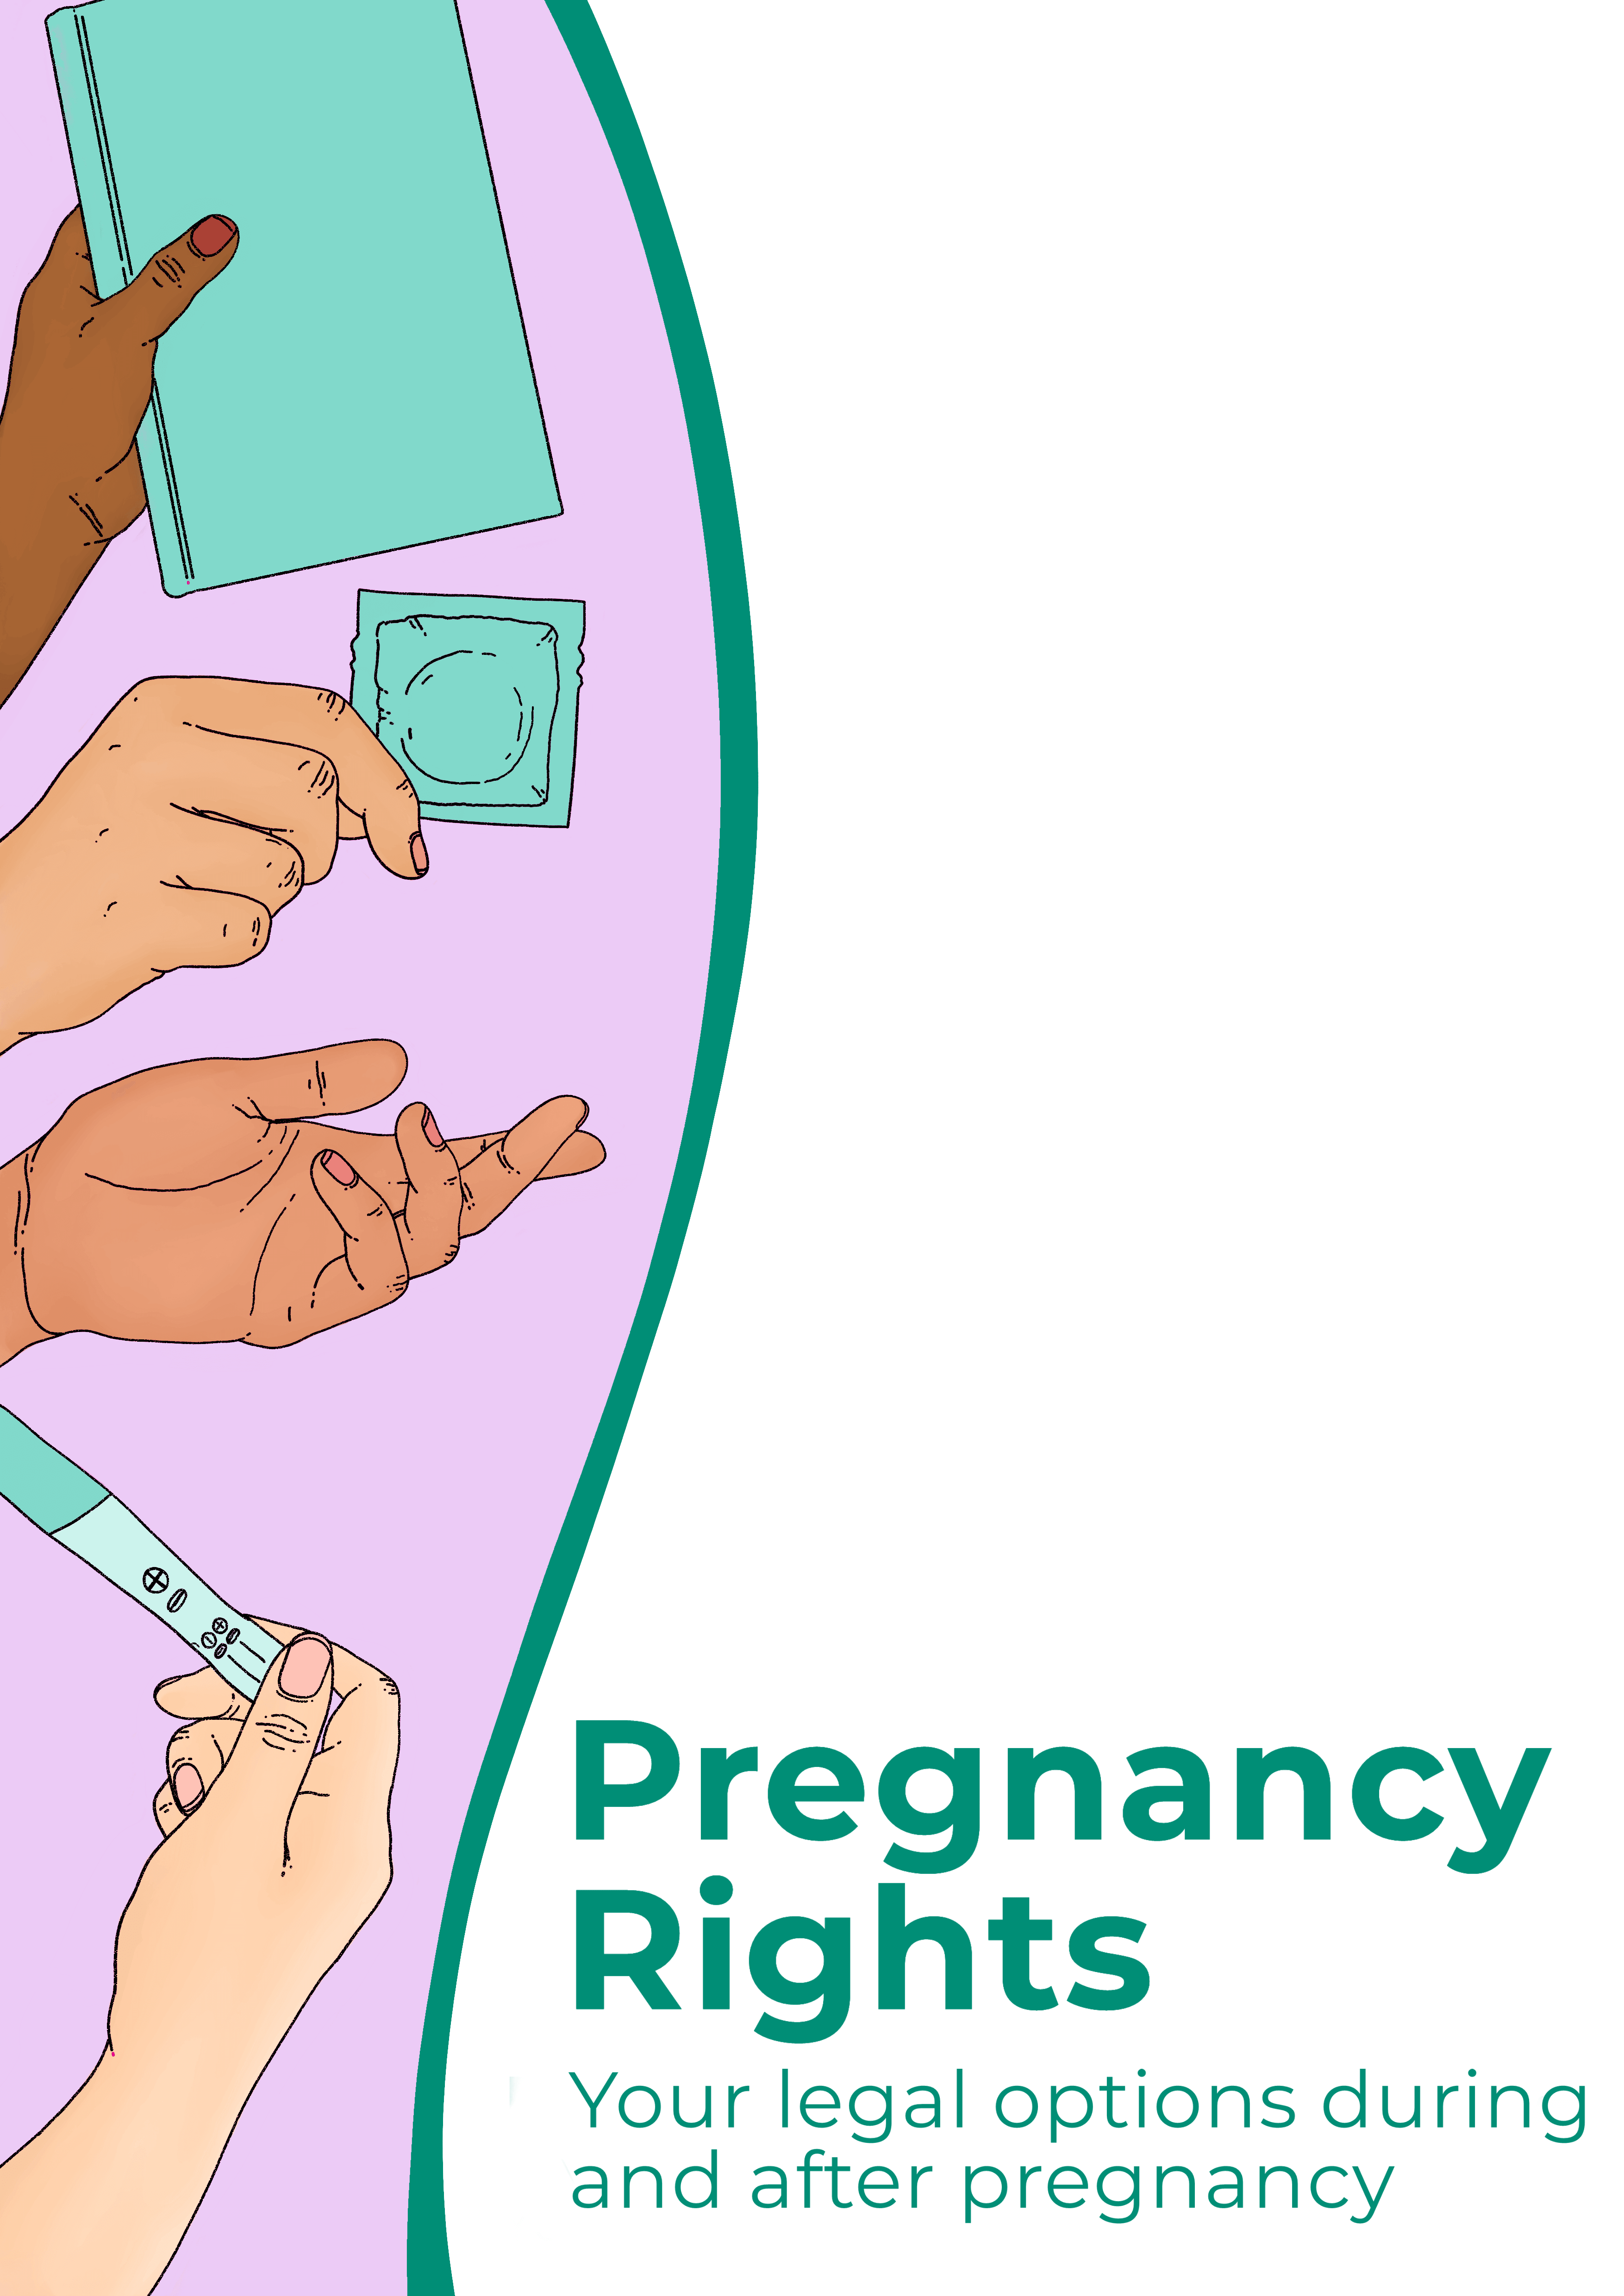 Pregnancy Rights: Your legal options during and after pregnancy book cover